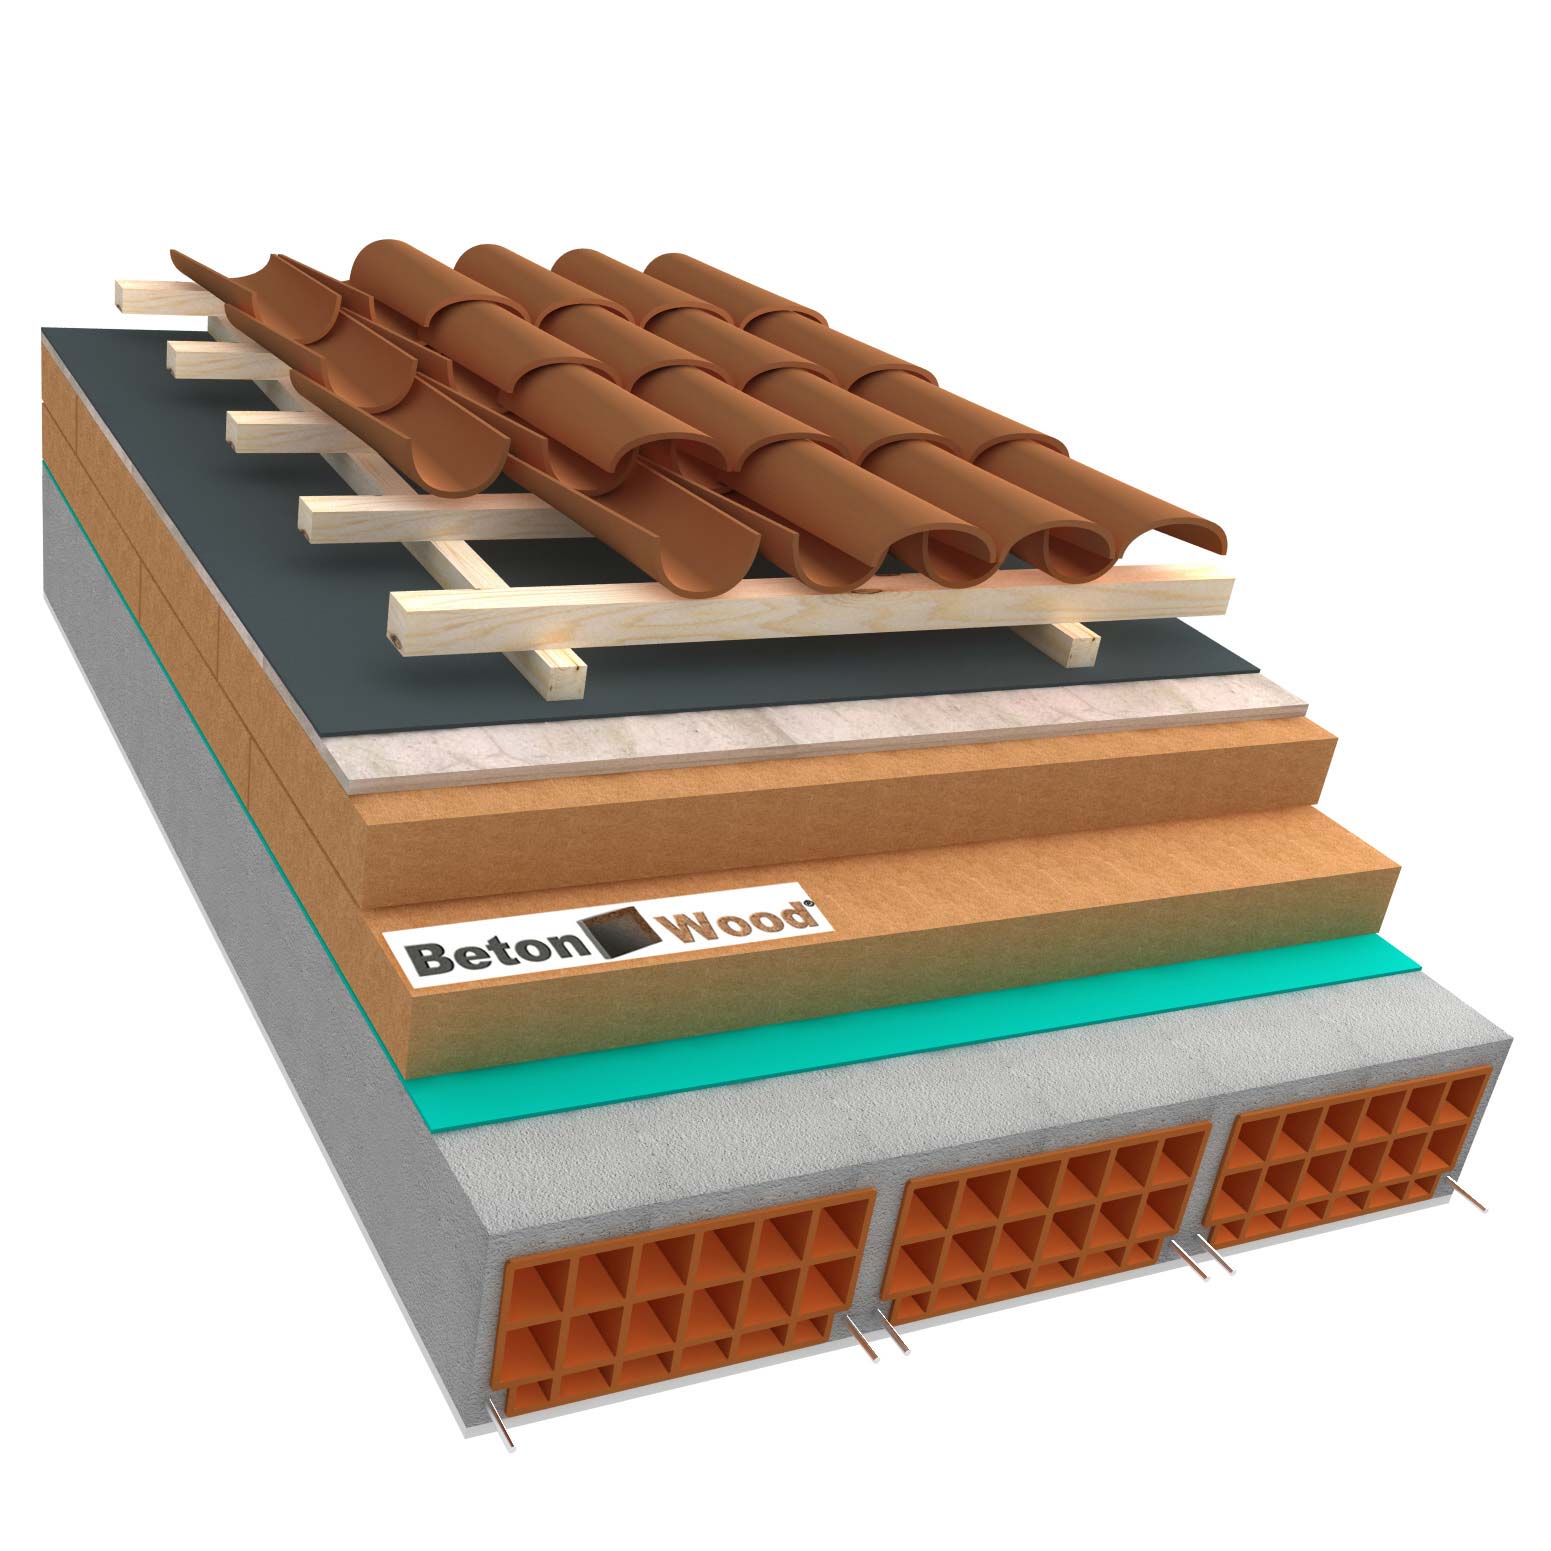 Ventilated roof with wood fiber Therm and cement bonded particle boards on concrete